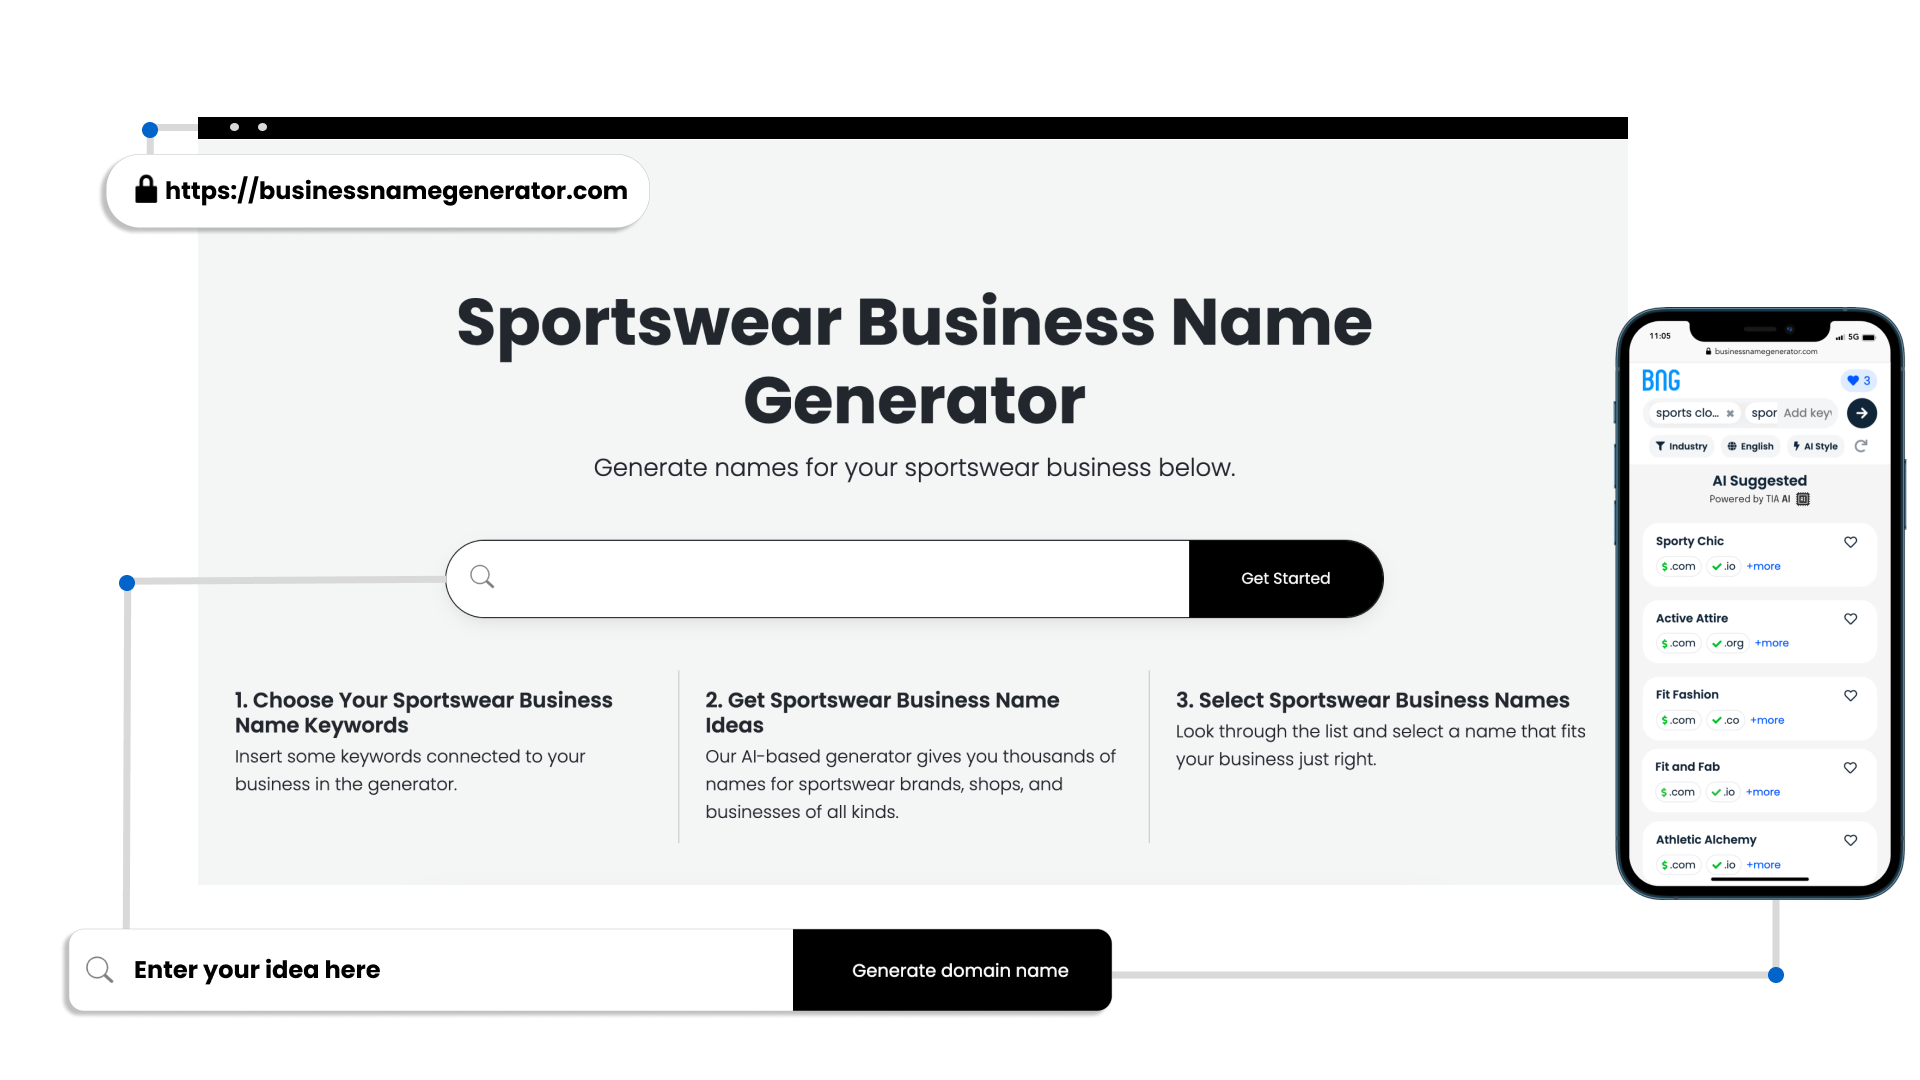 Benefits of Our Sportswear Business Name Generator